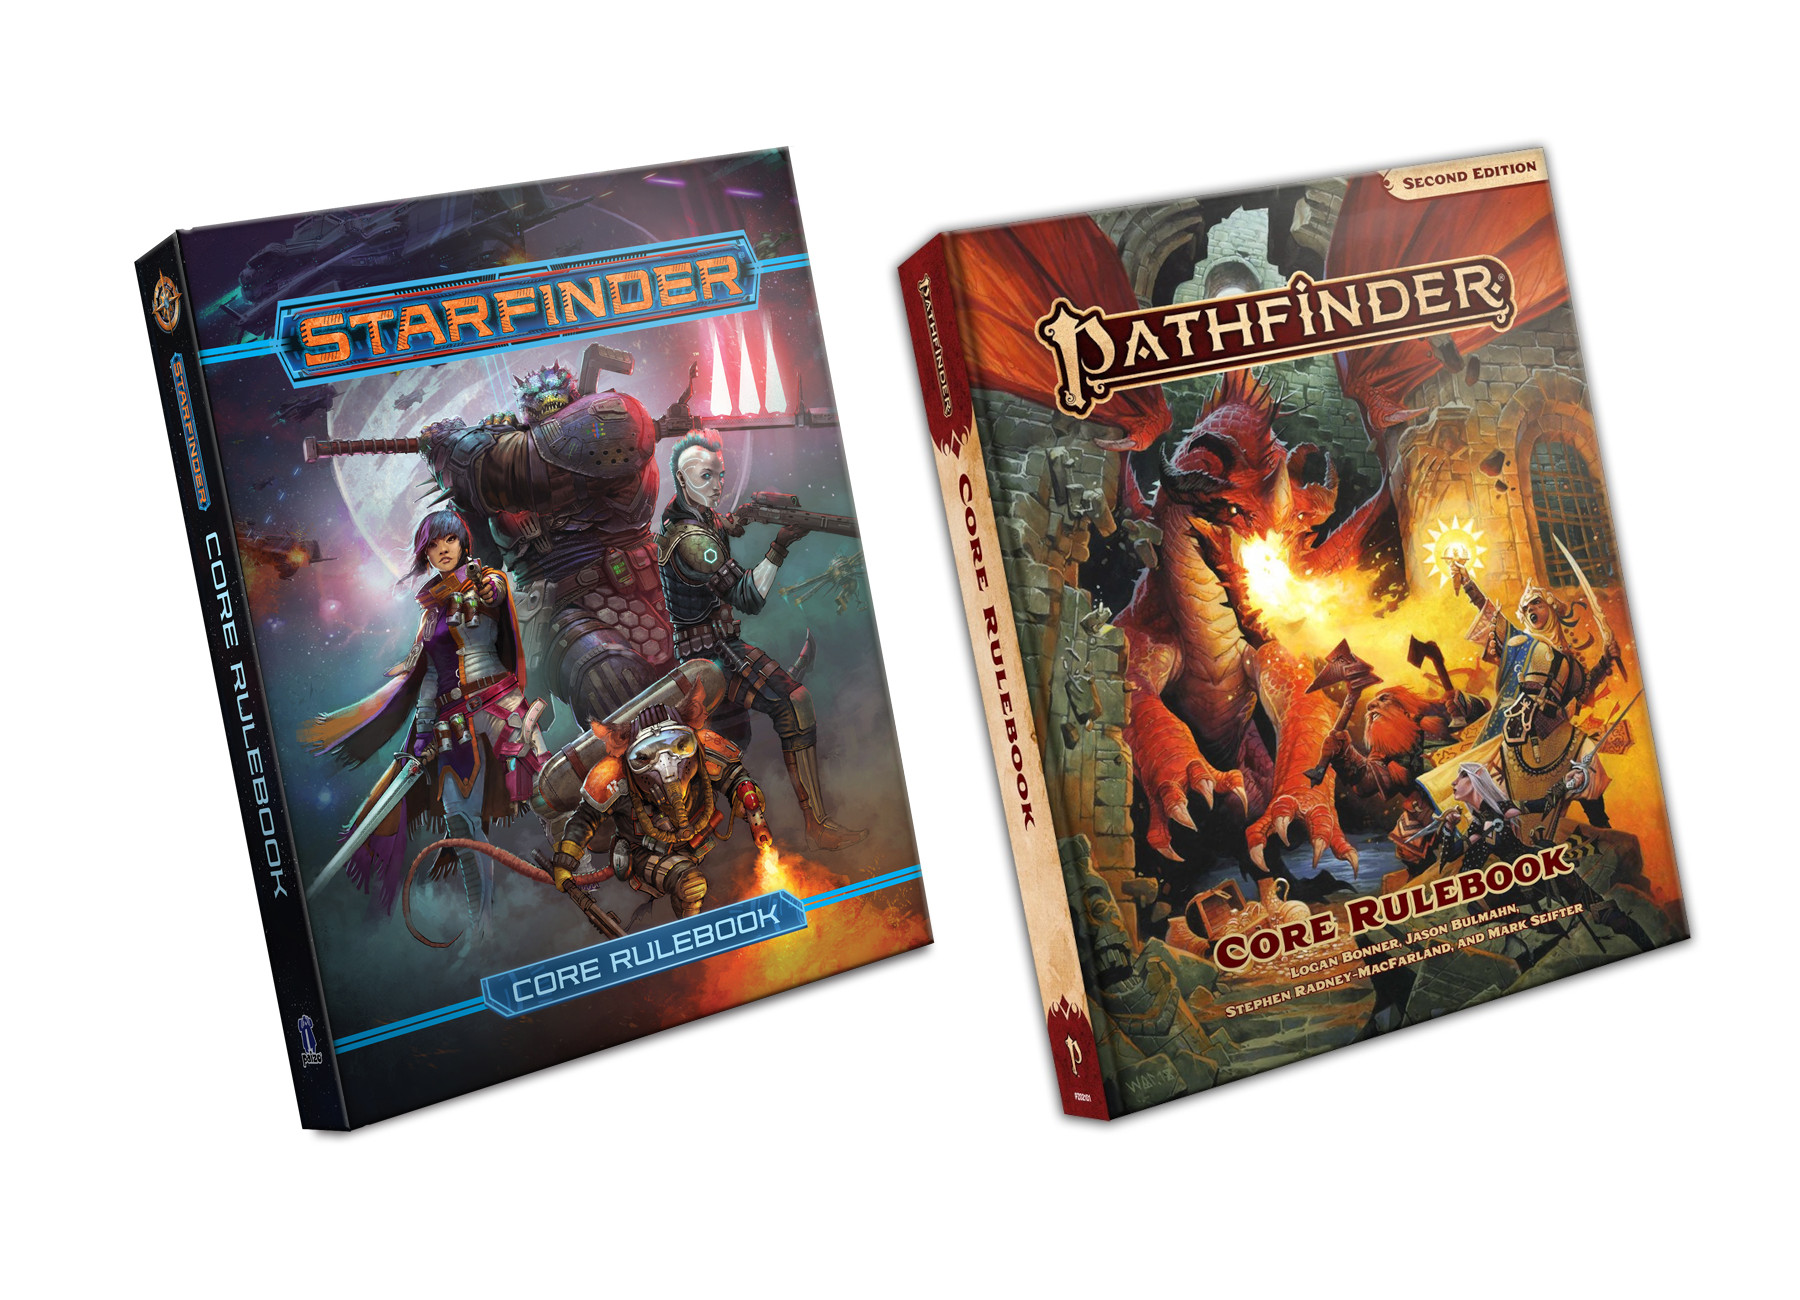 Pathfinder Second Edition Core Rulebook and Starfinder Core Rulebook Digital CD Key, $12.58